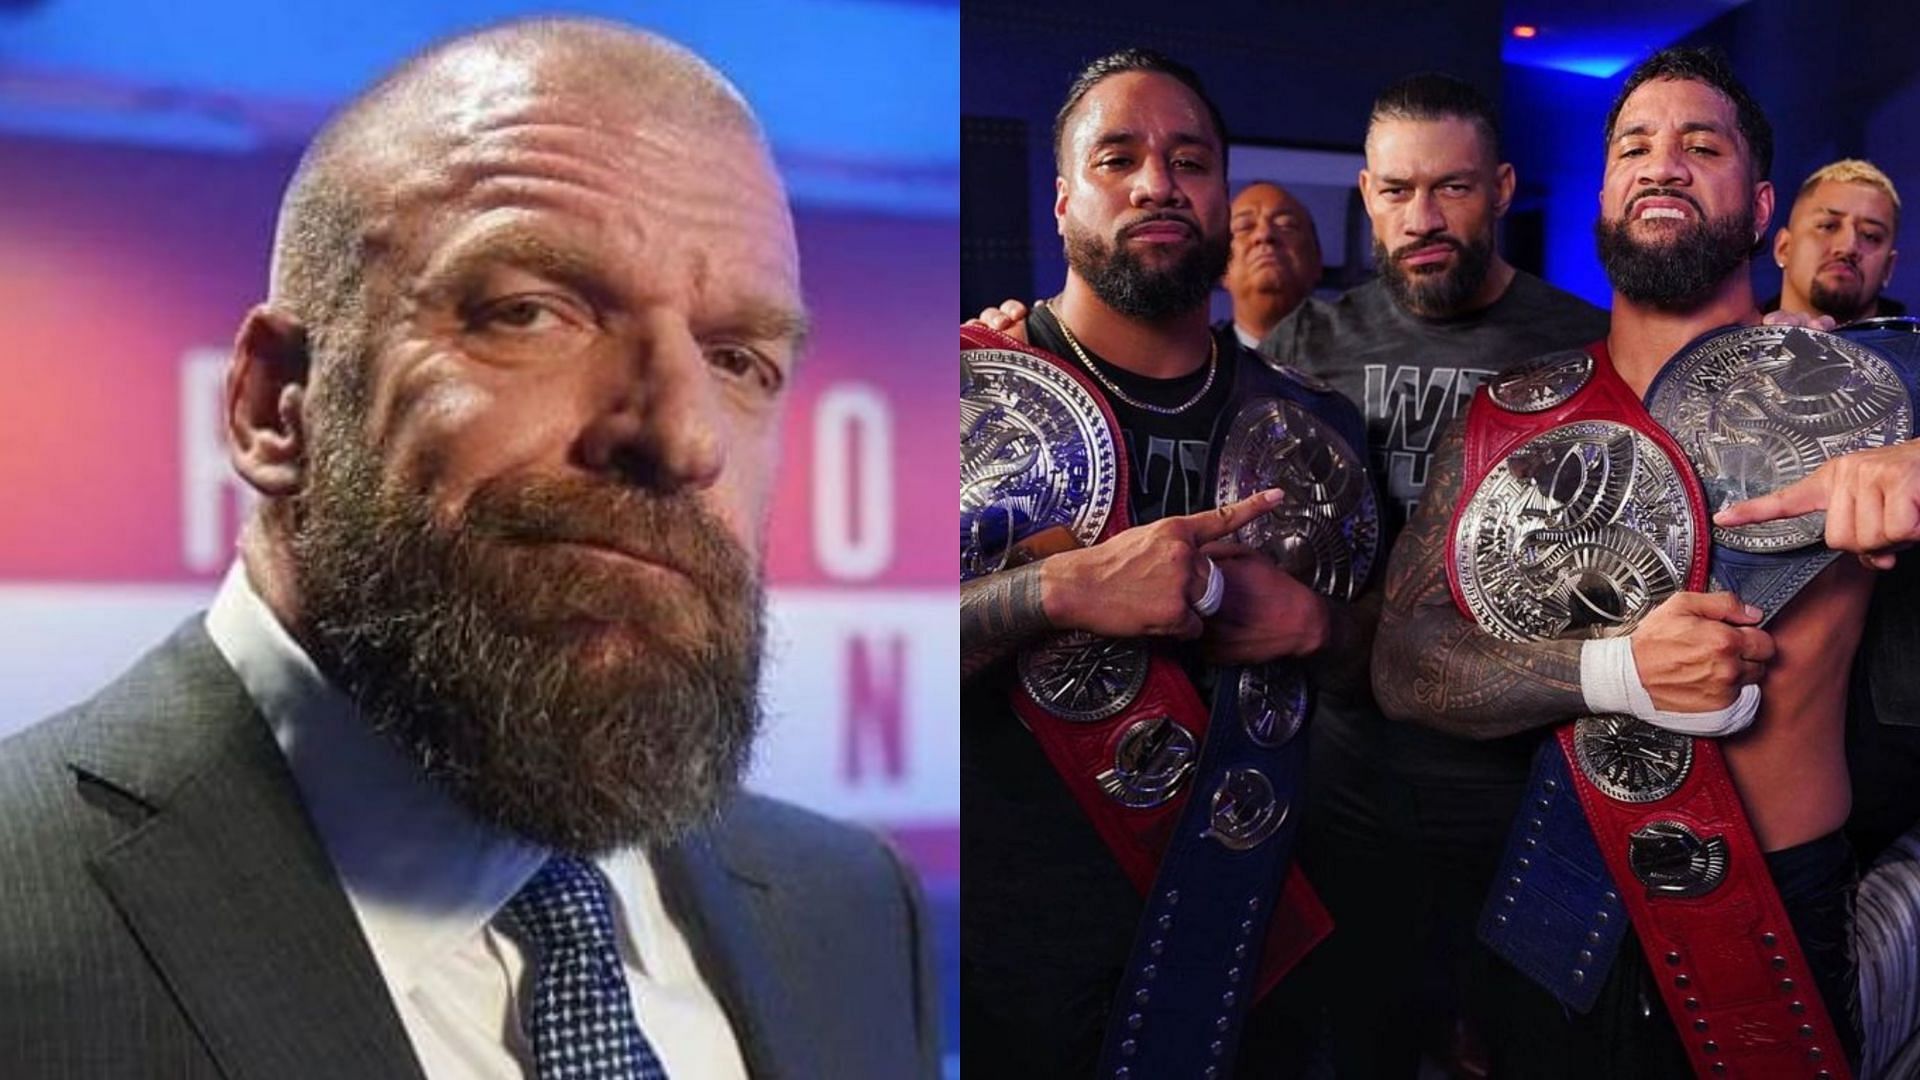 WWE CCO Triple H (left) and The Bloodline (right)